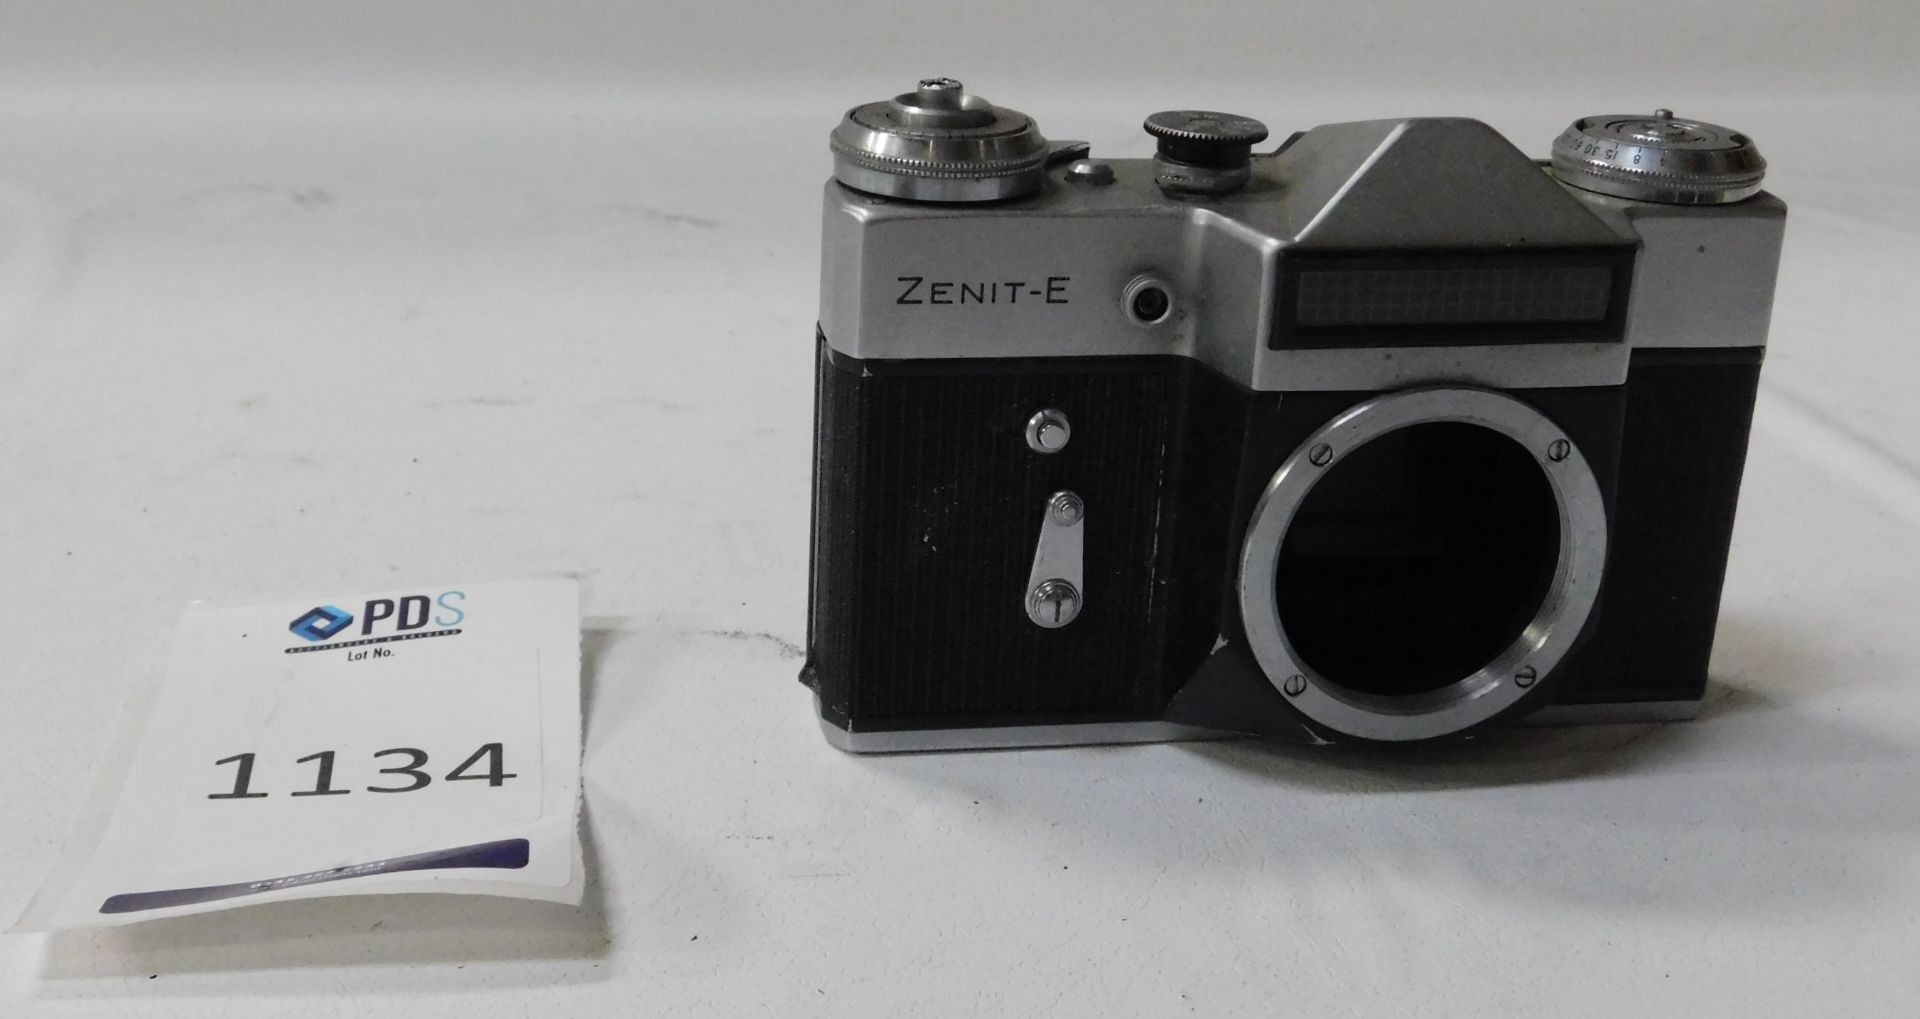 Zenit-E Film Camera, Number 73077568 (Location: Brentwood. Please Refer to General Notes)